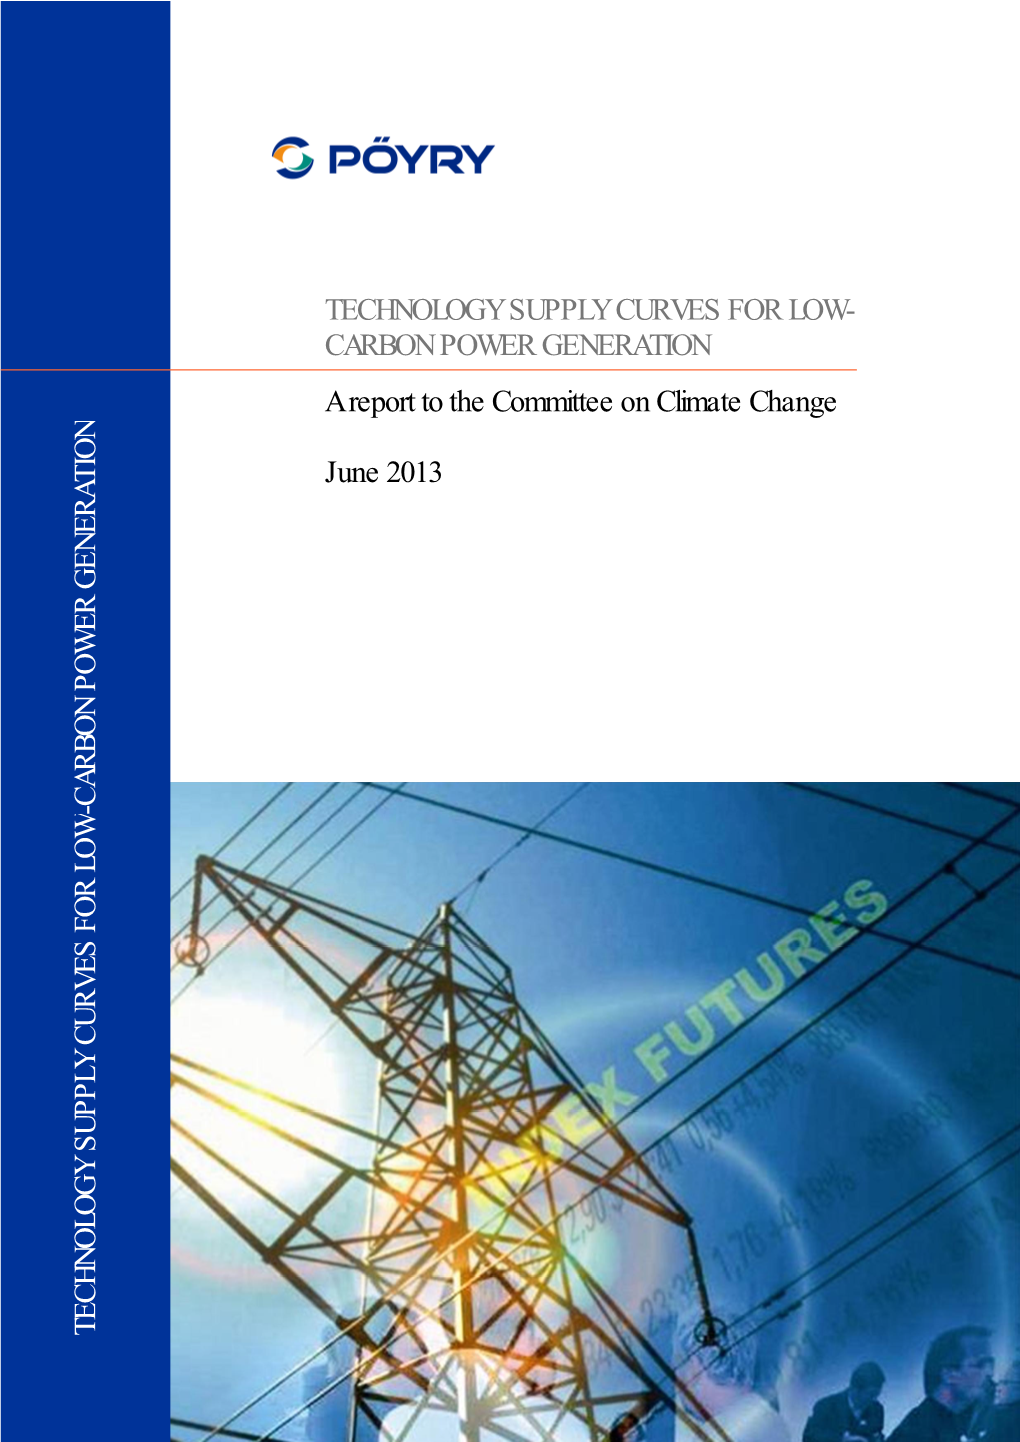 Technology Supply Curves for Low-Carbon Power Generation